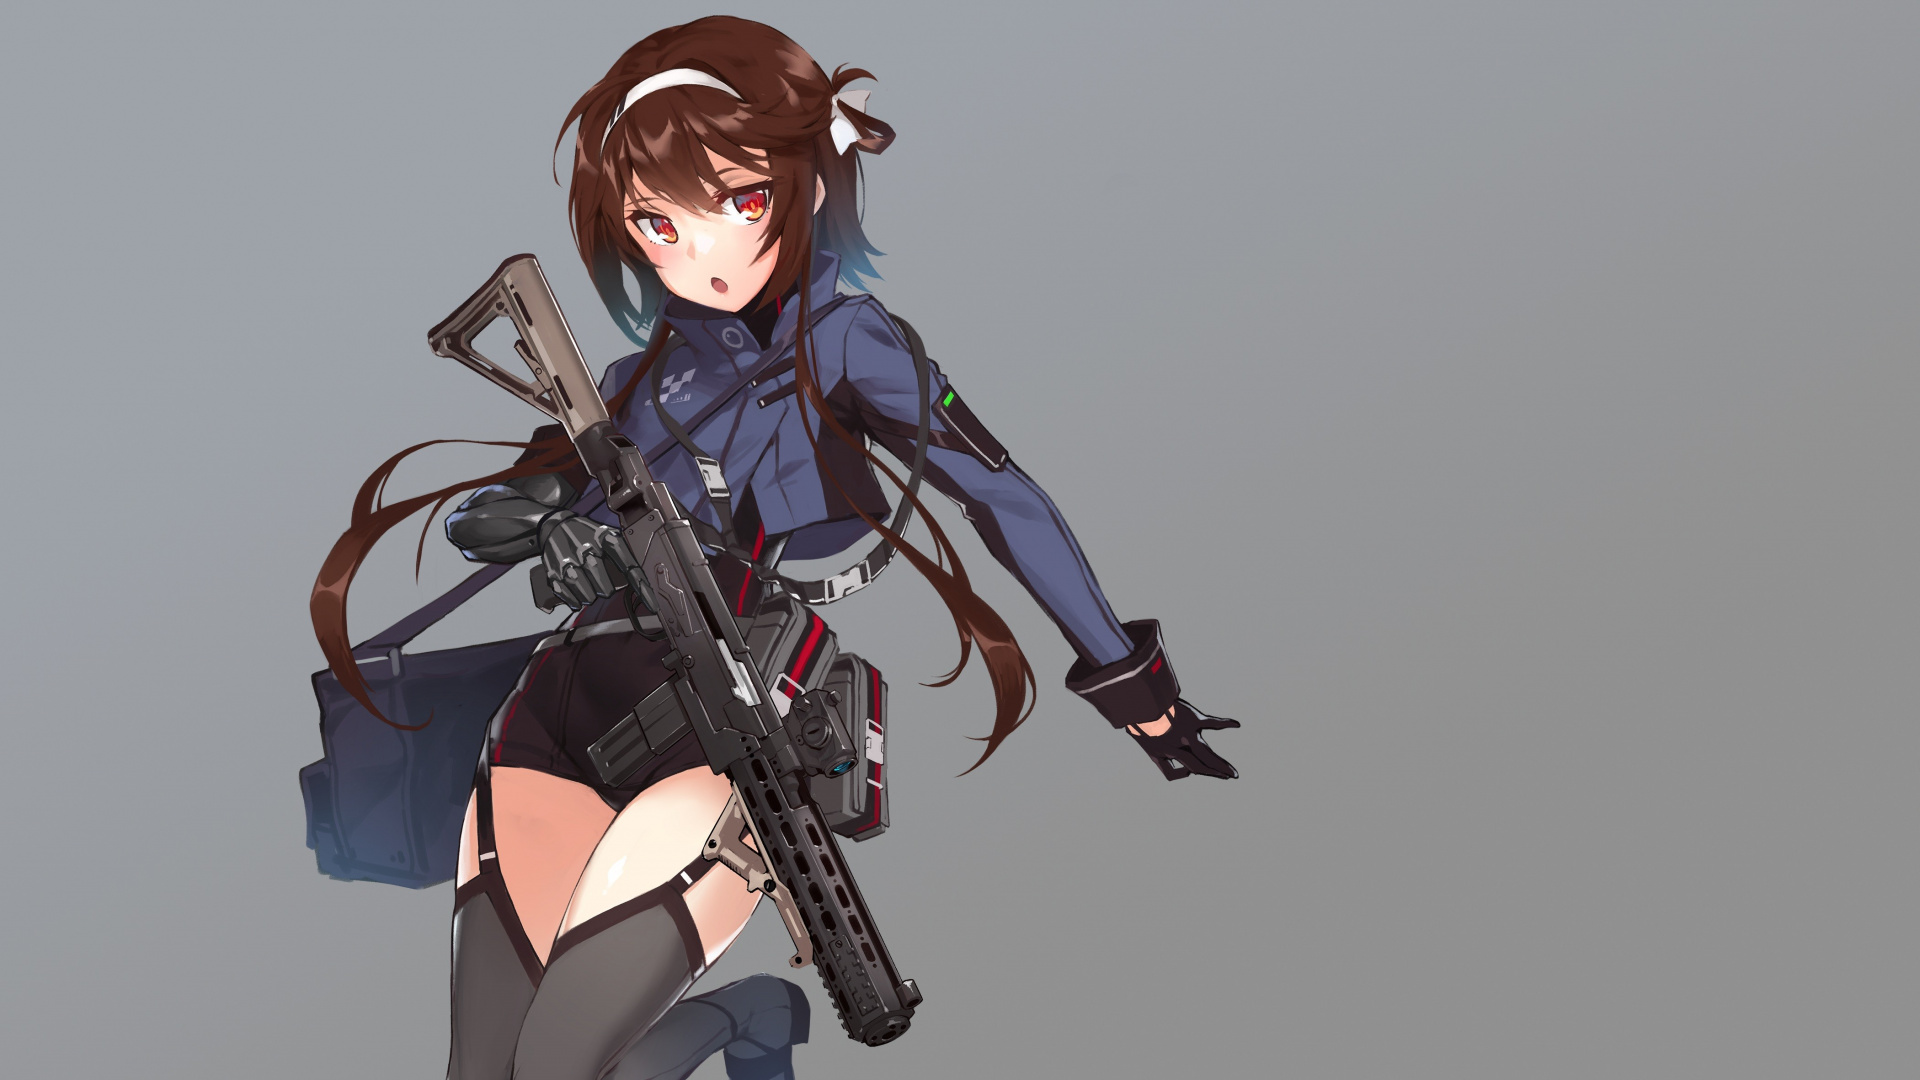 Woman in Blue and Black Dress Holding Rifle Anime Character. Wallpaper in 1920x1080 Resolution